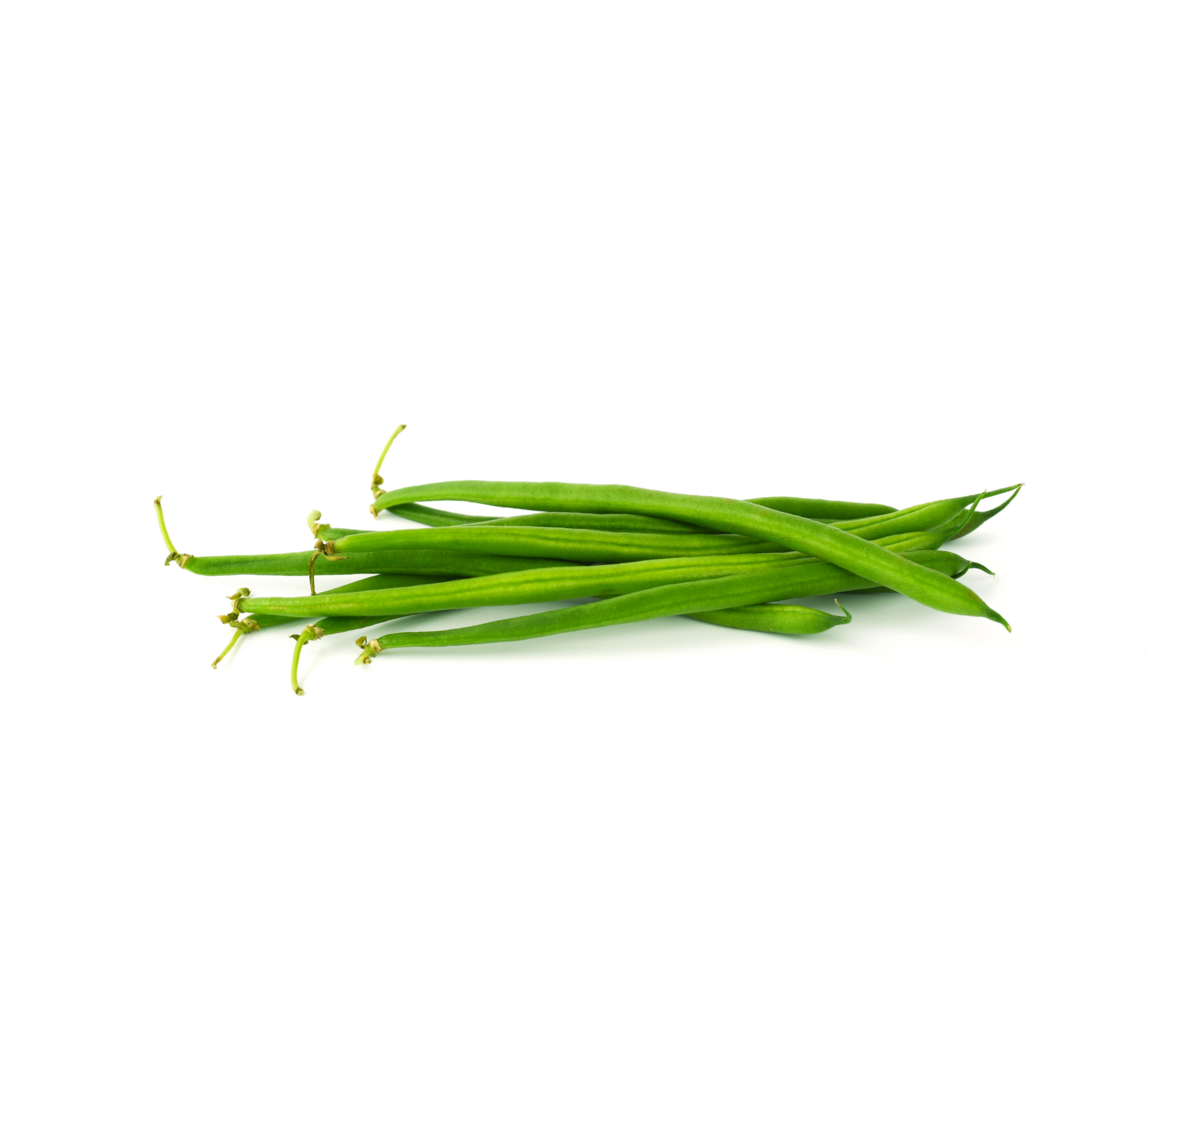 Haricots verts cultivation for the best quality haricots verts